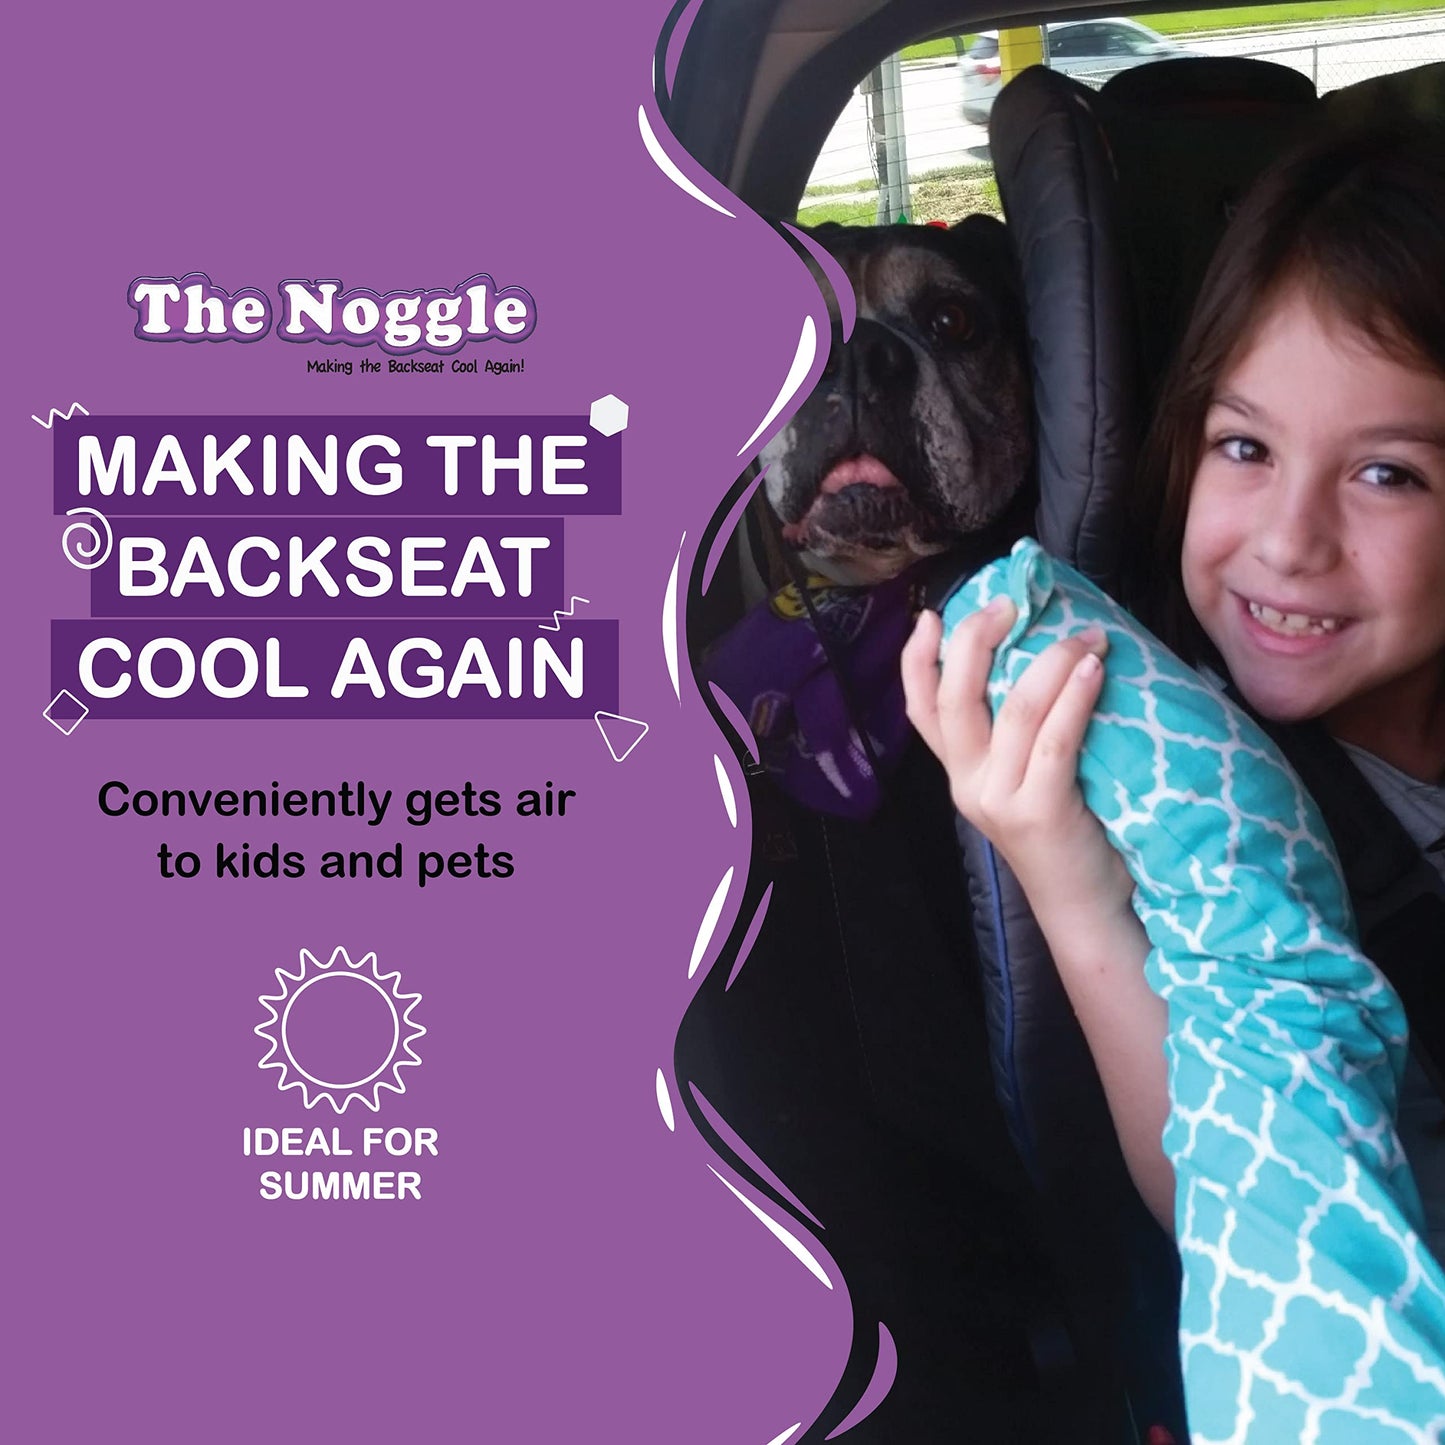 NOGGLE, 8ft - Kids Personal Air Conditioning System